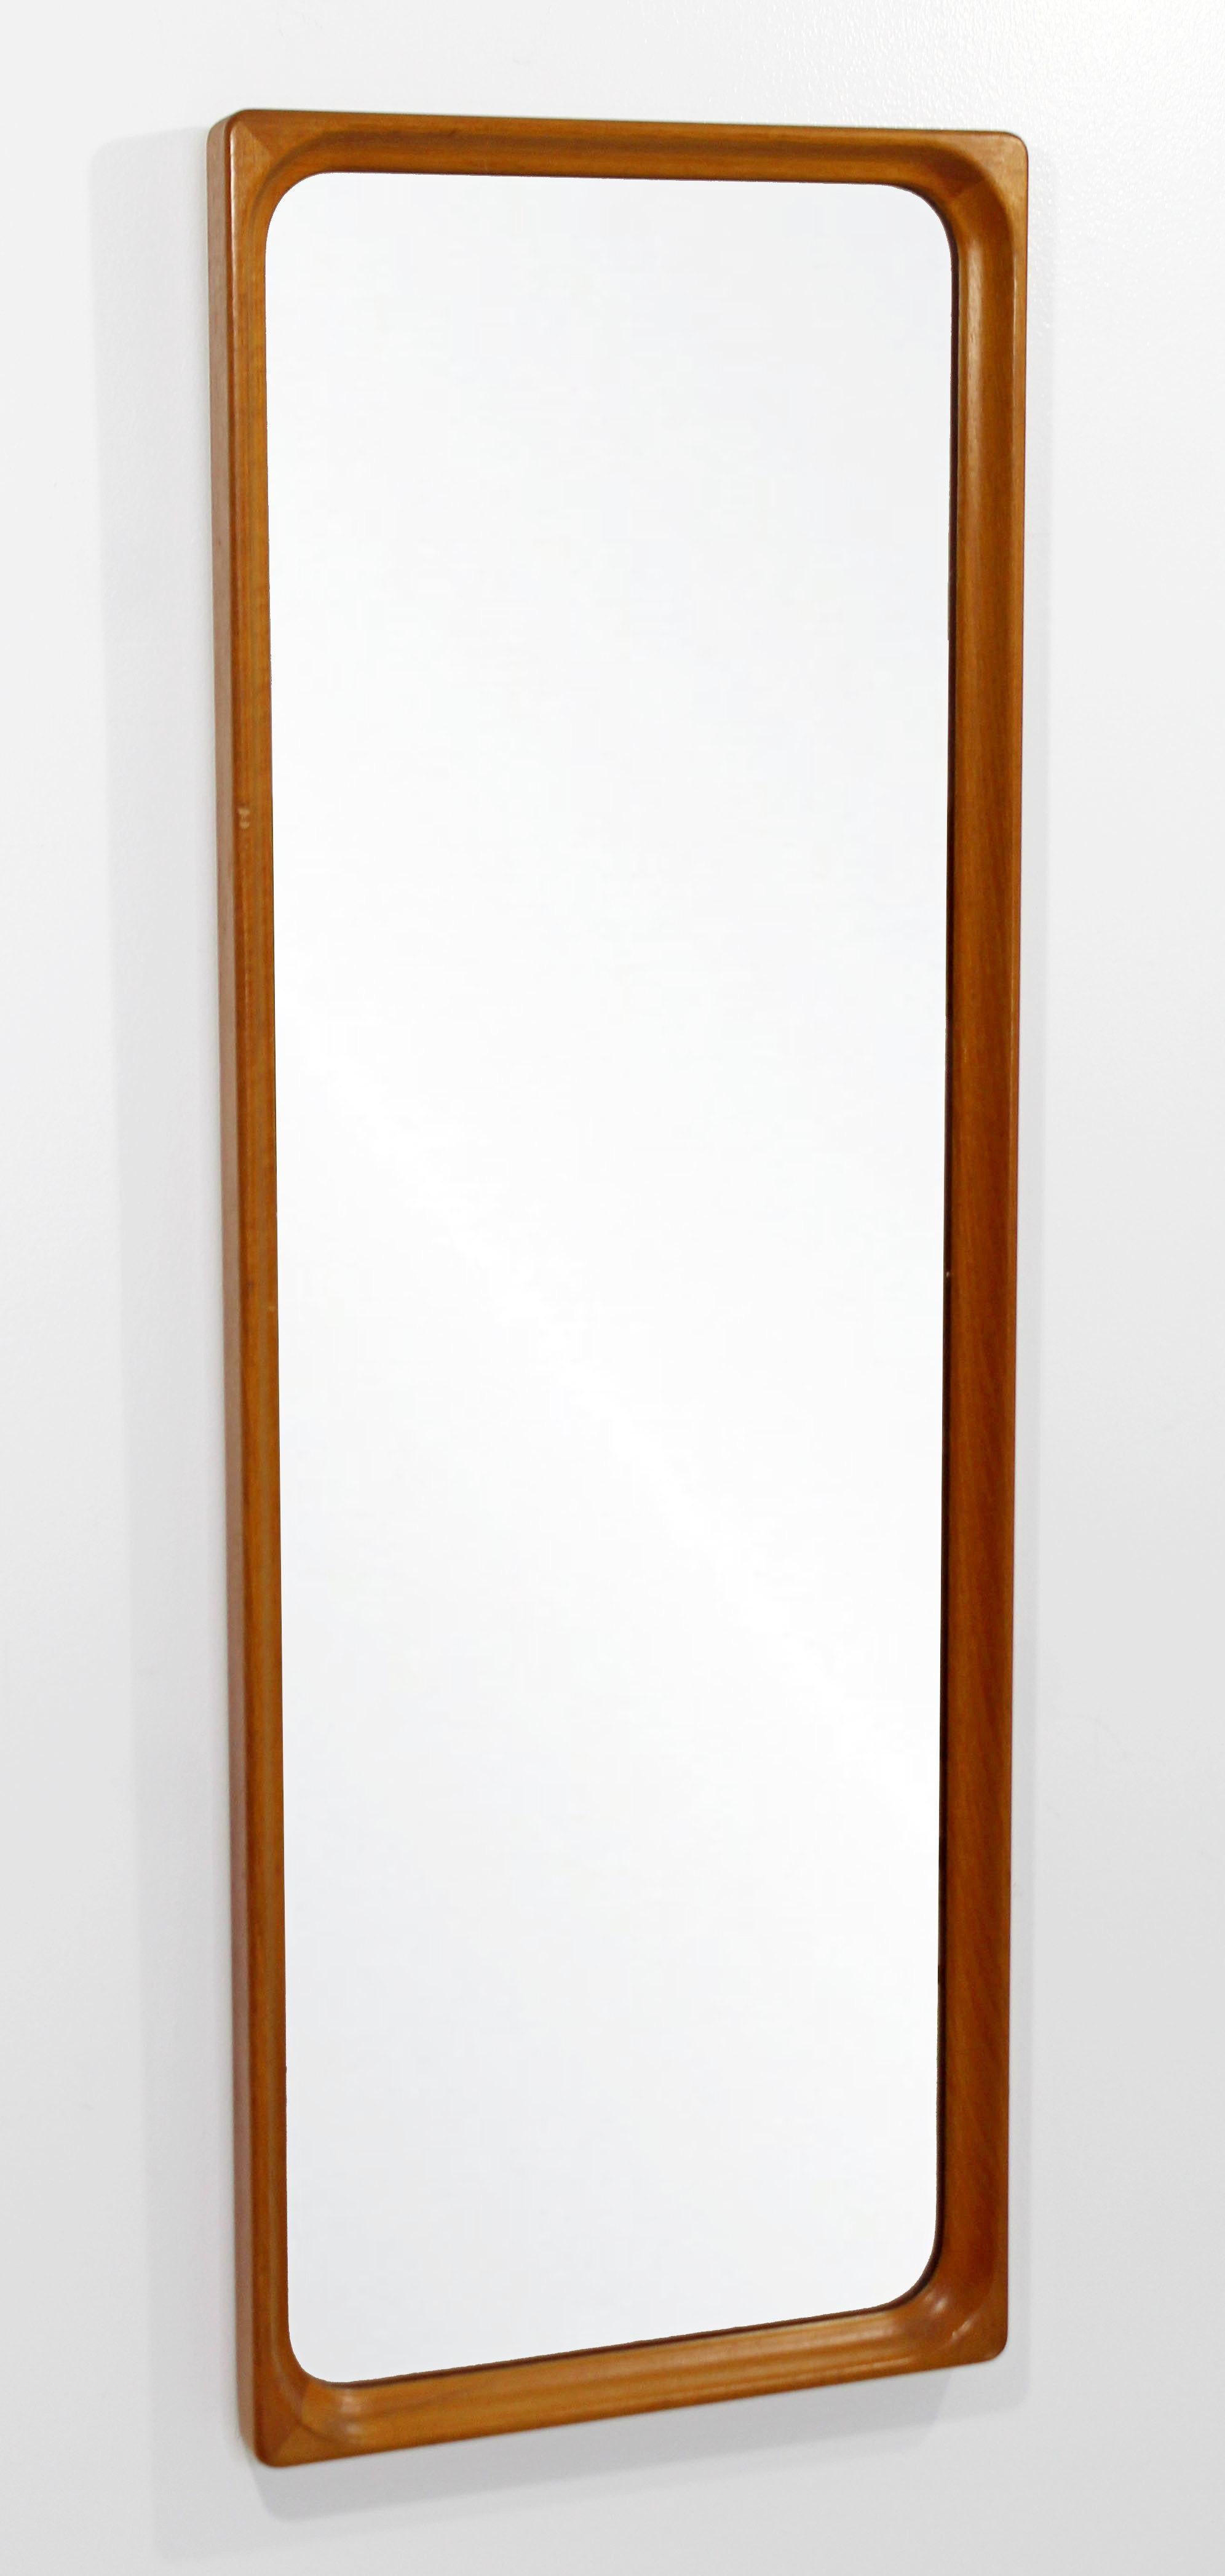 For your consideration is a gorgeous, rectangular, hanging wall mirror, by Markaryd Glas Master, Sweden, circa the 1950s-1960s. In excellent condition, despite a small mark in the wood. The dimensions are 15